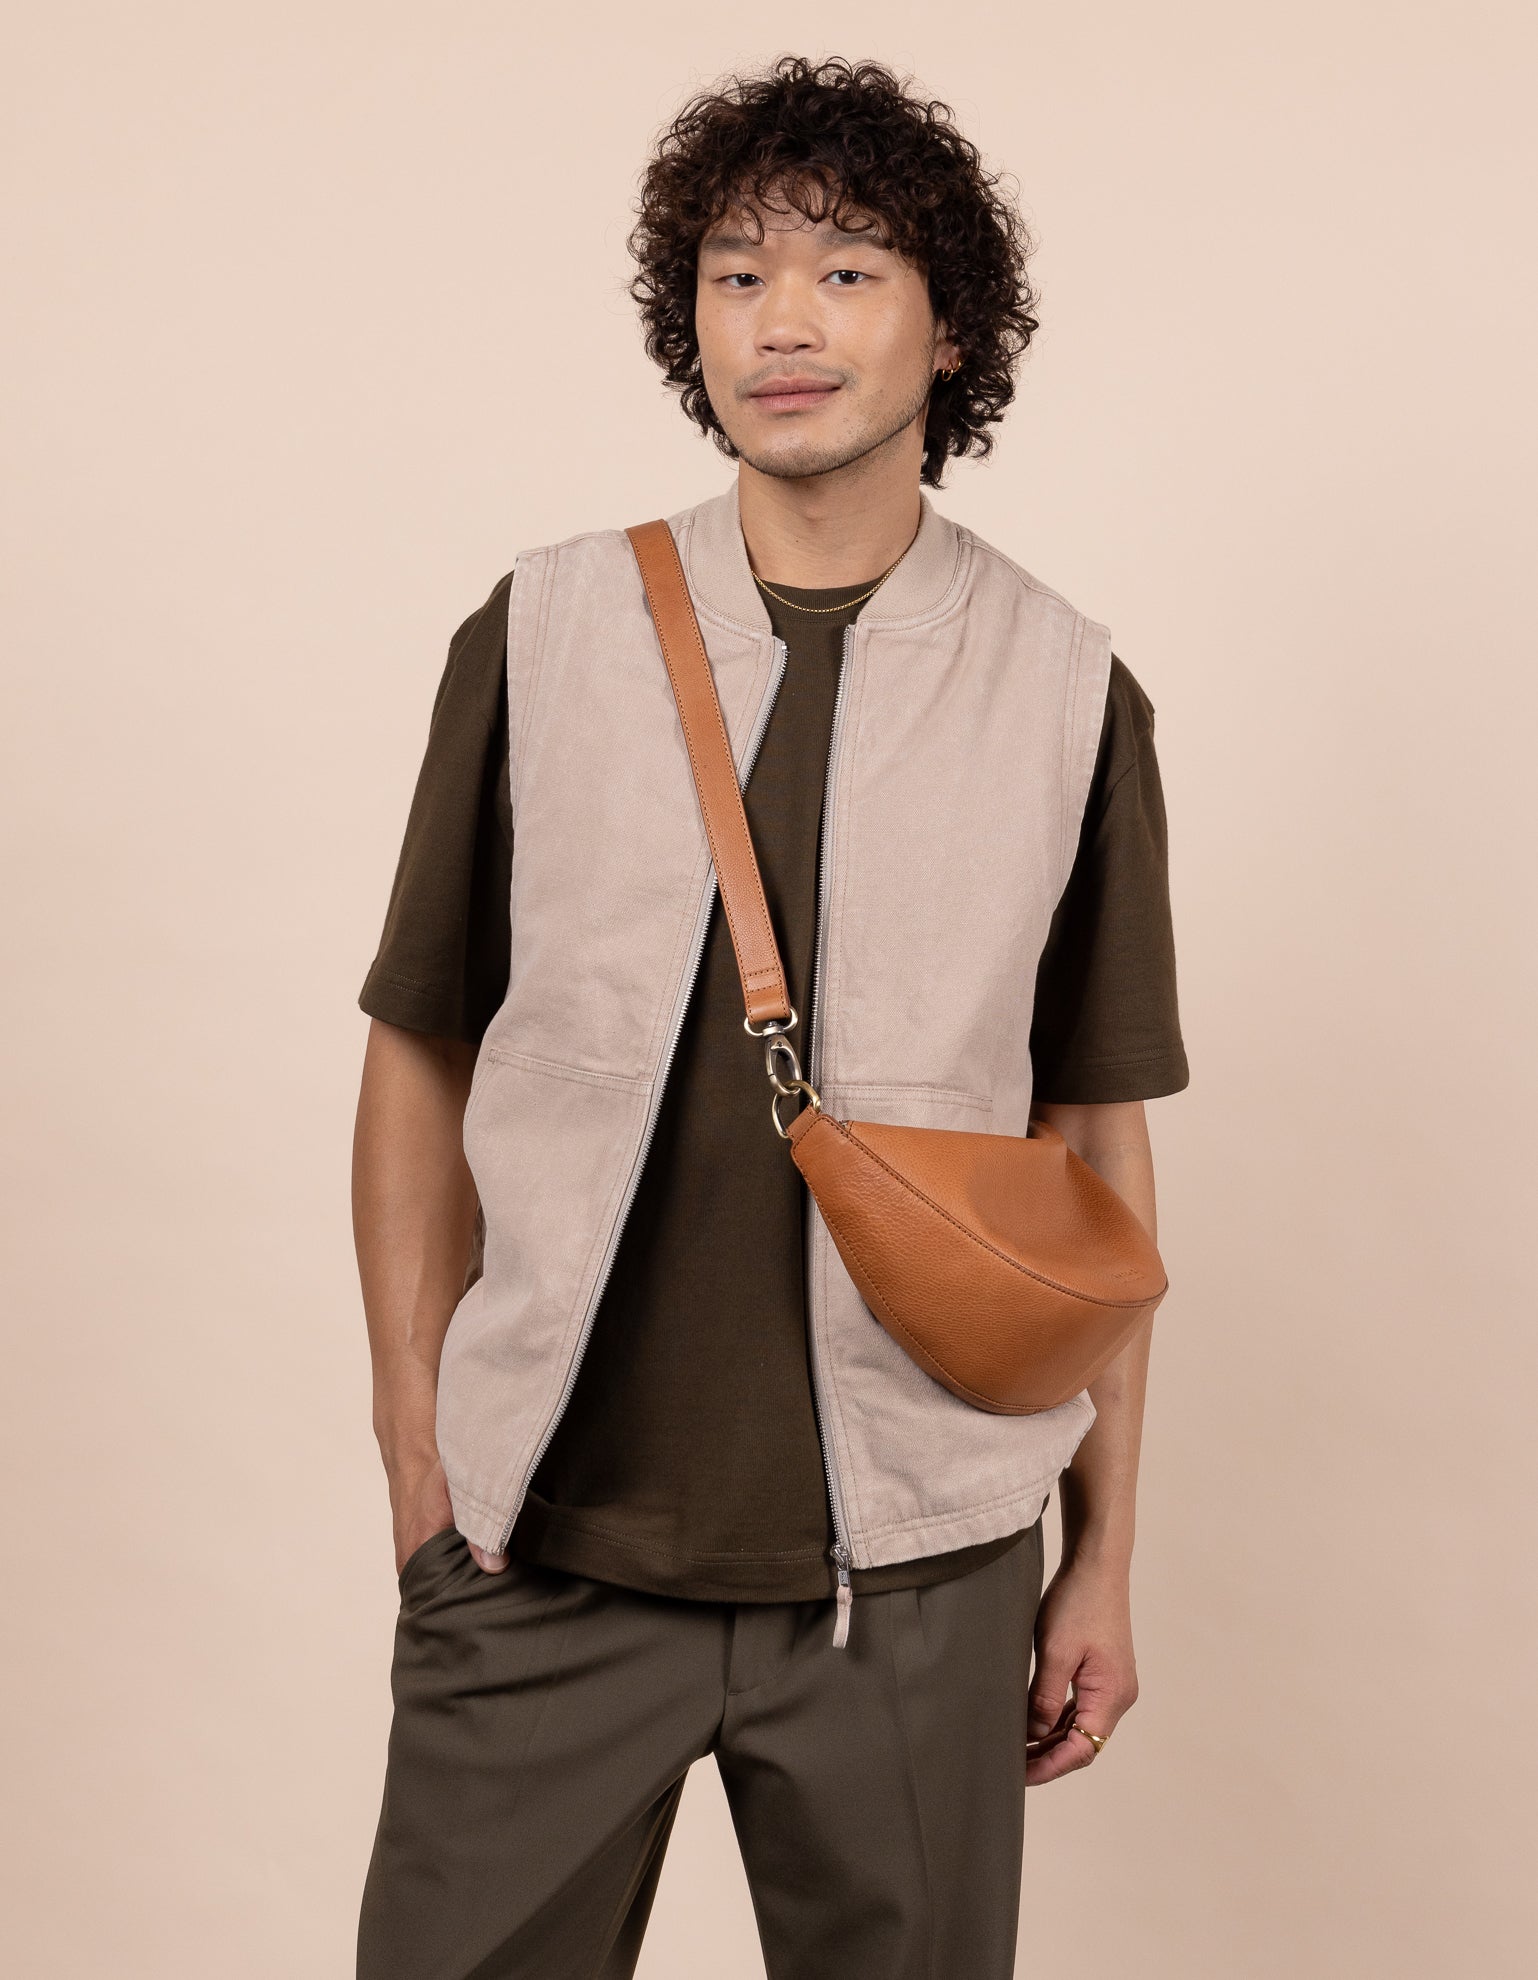 Male model with wild oak leather bag